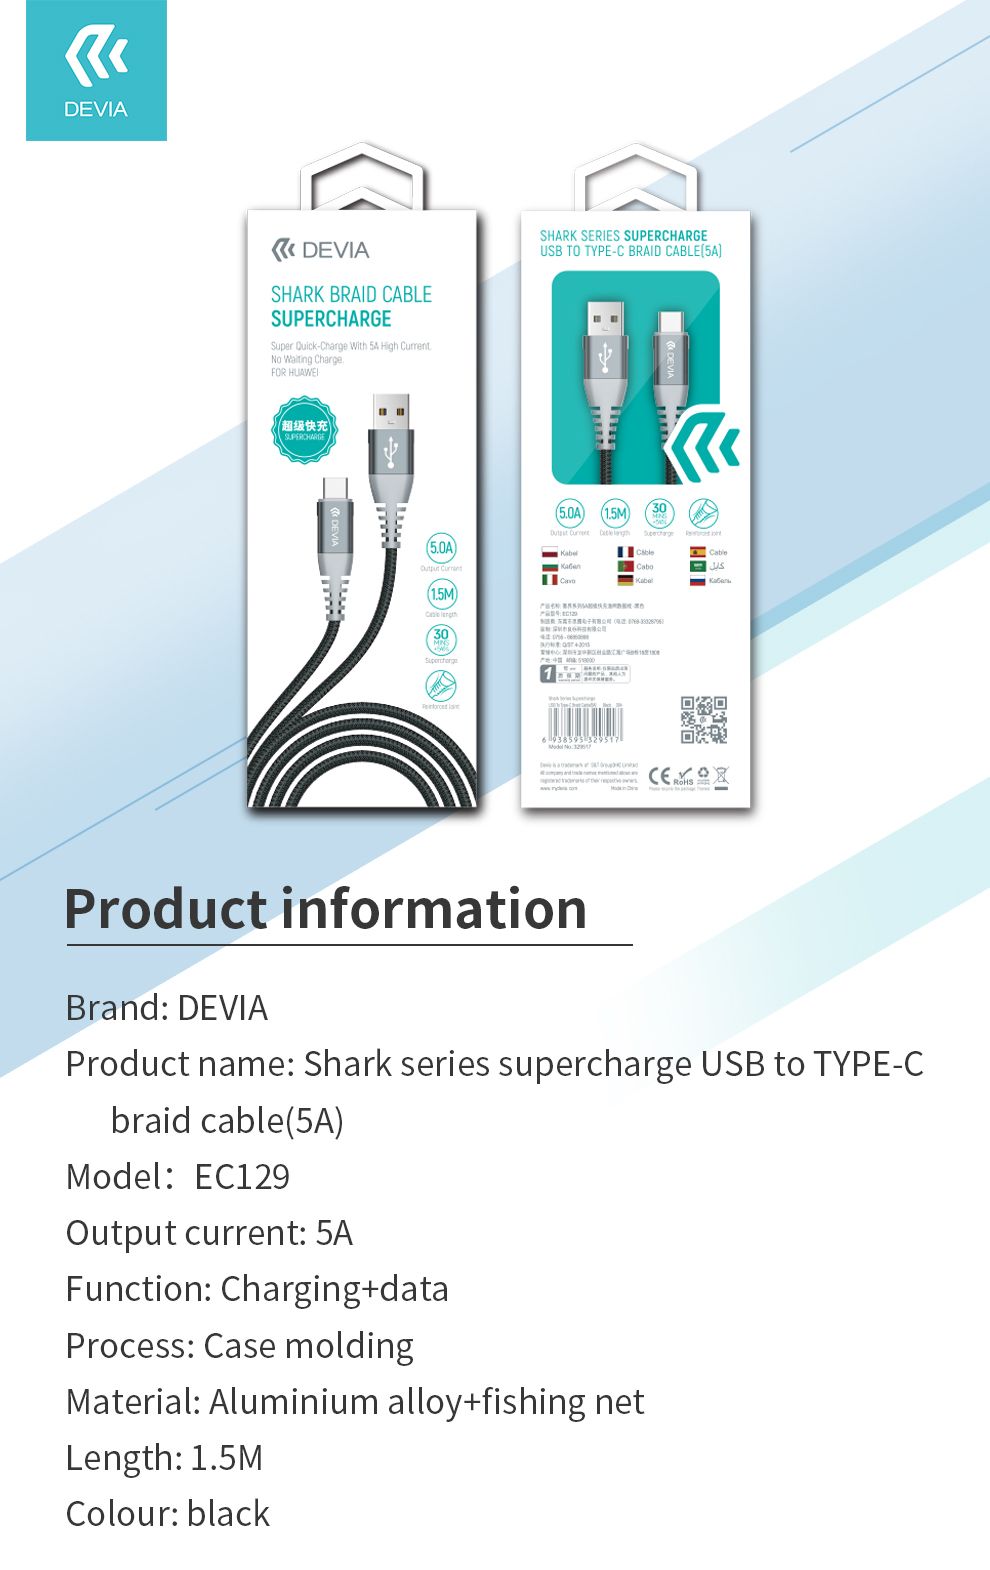 Usb to Type C Shark Series Supercharge Braid Cable, It offers an easy solution to connect your USB C devices to any phone charger